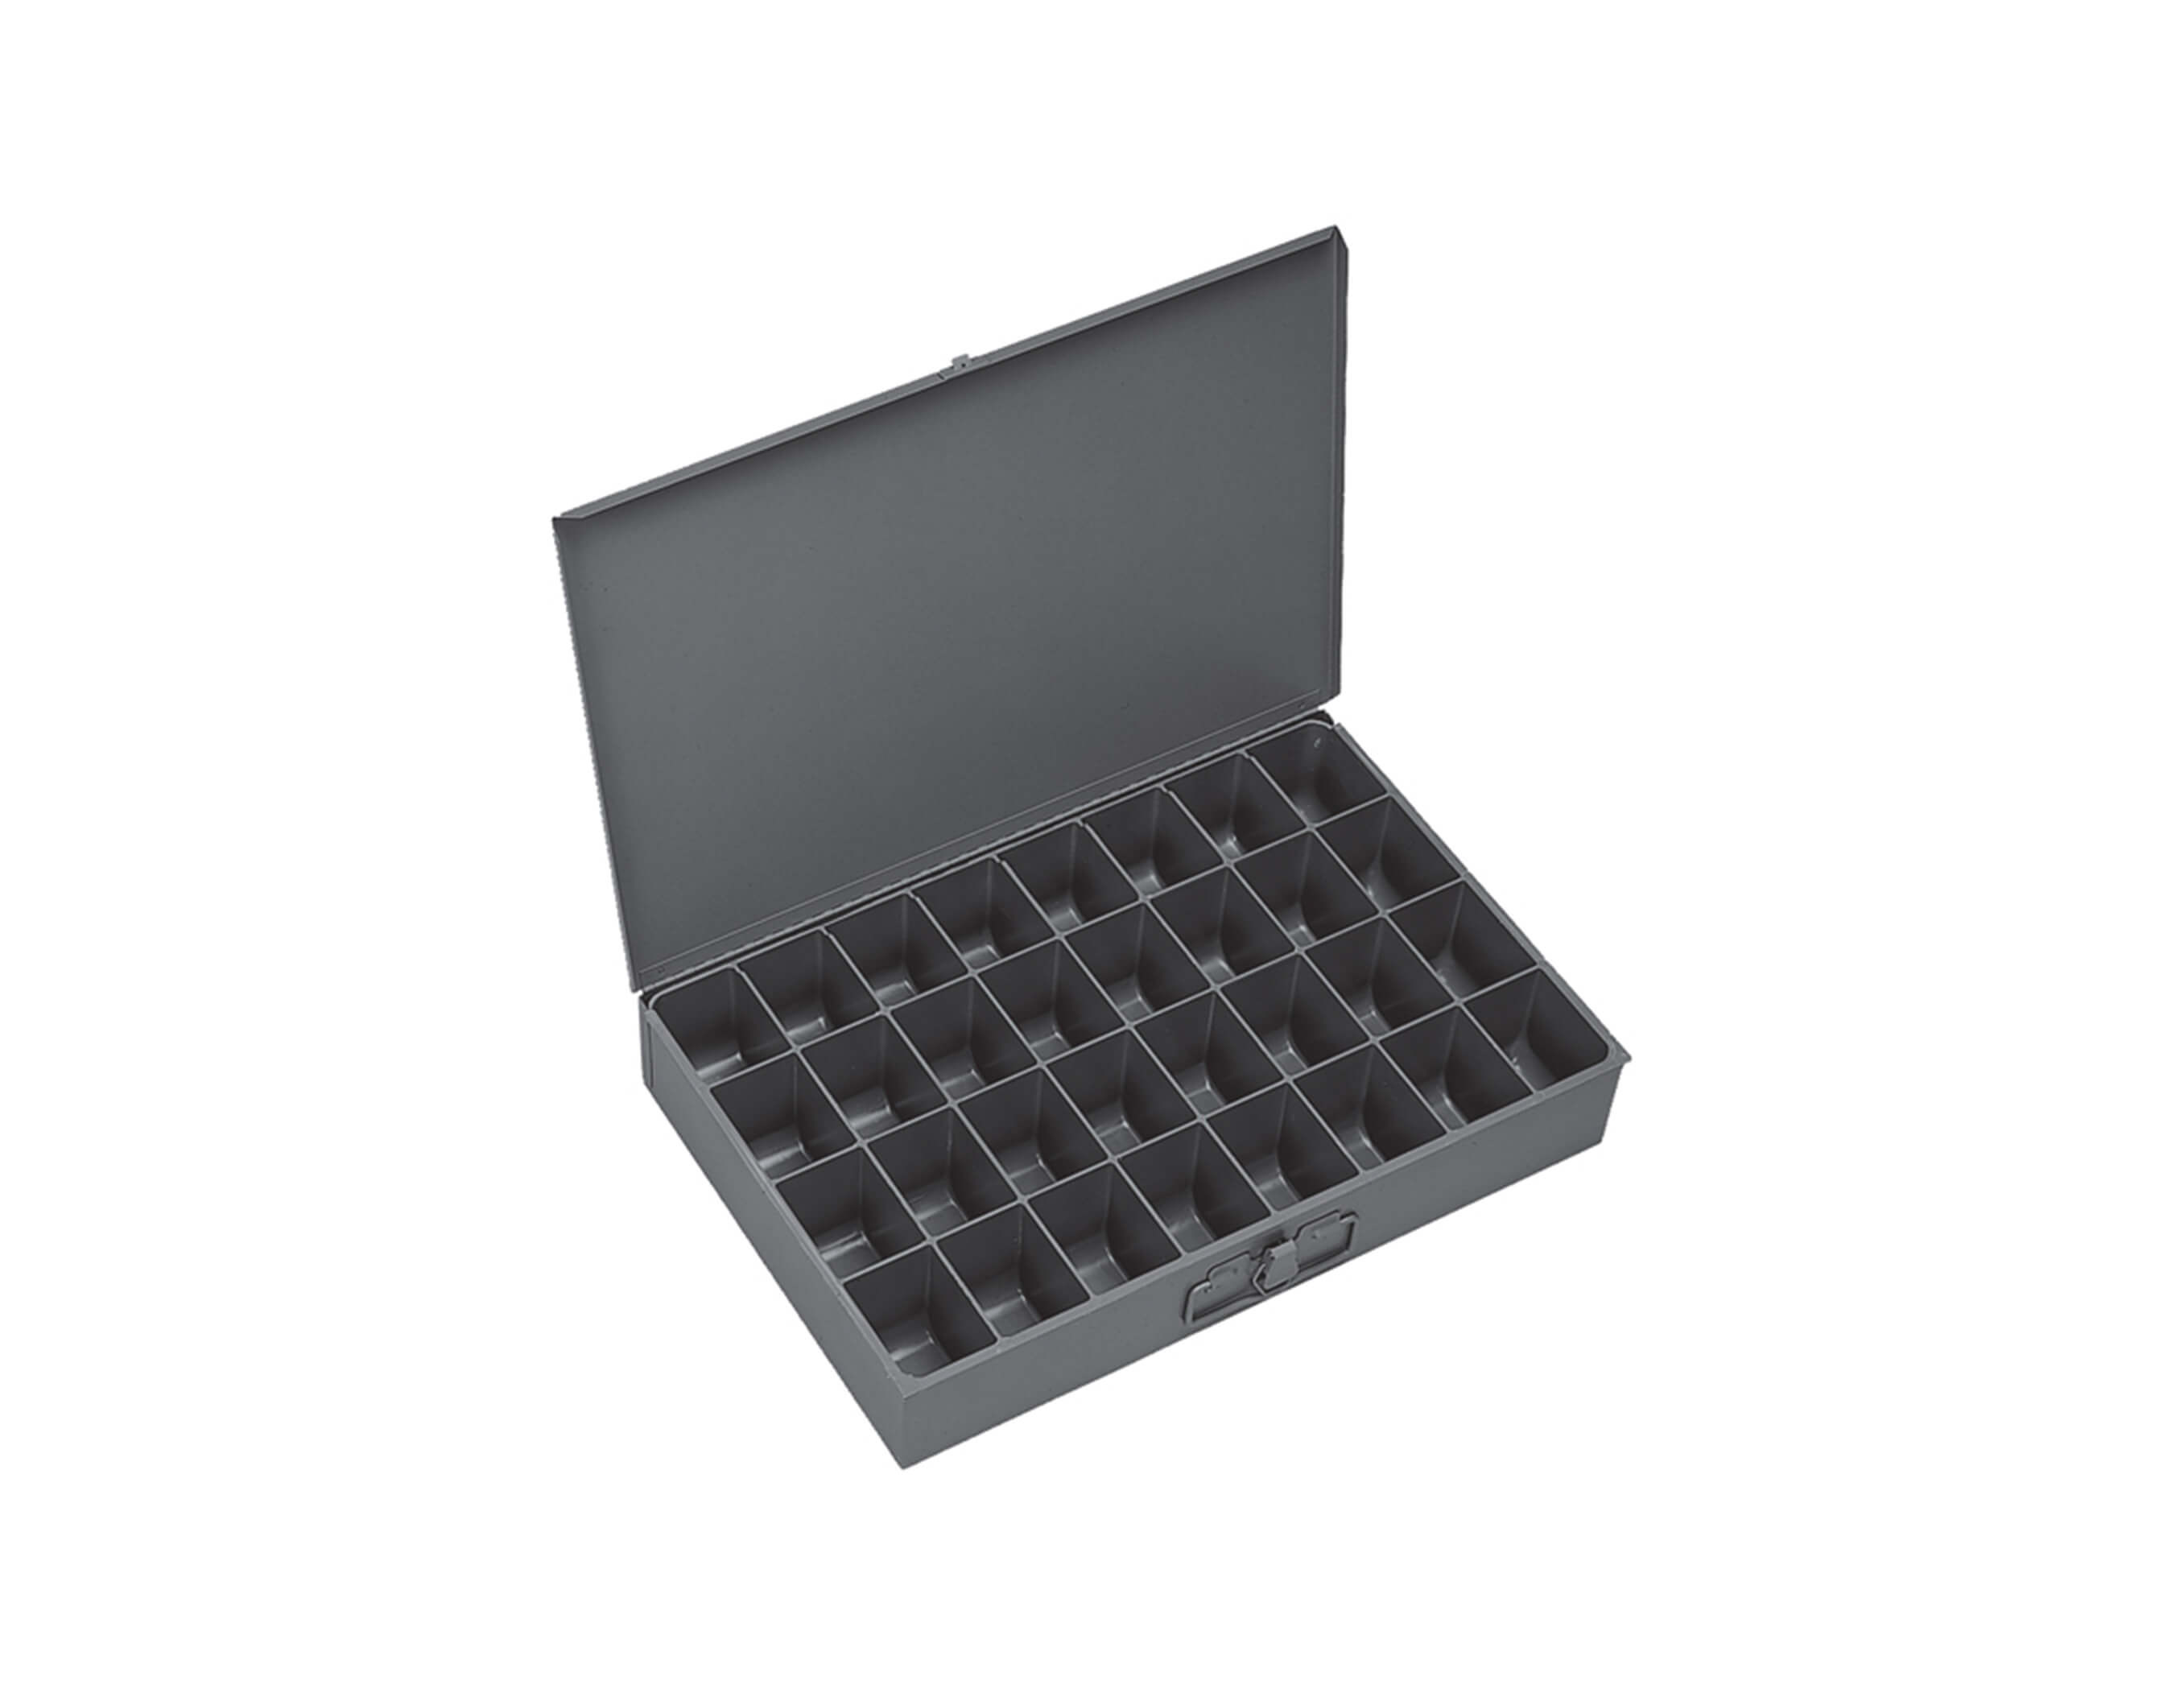 32 COMPARTMENT DRAWER BLACK (0966100016)